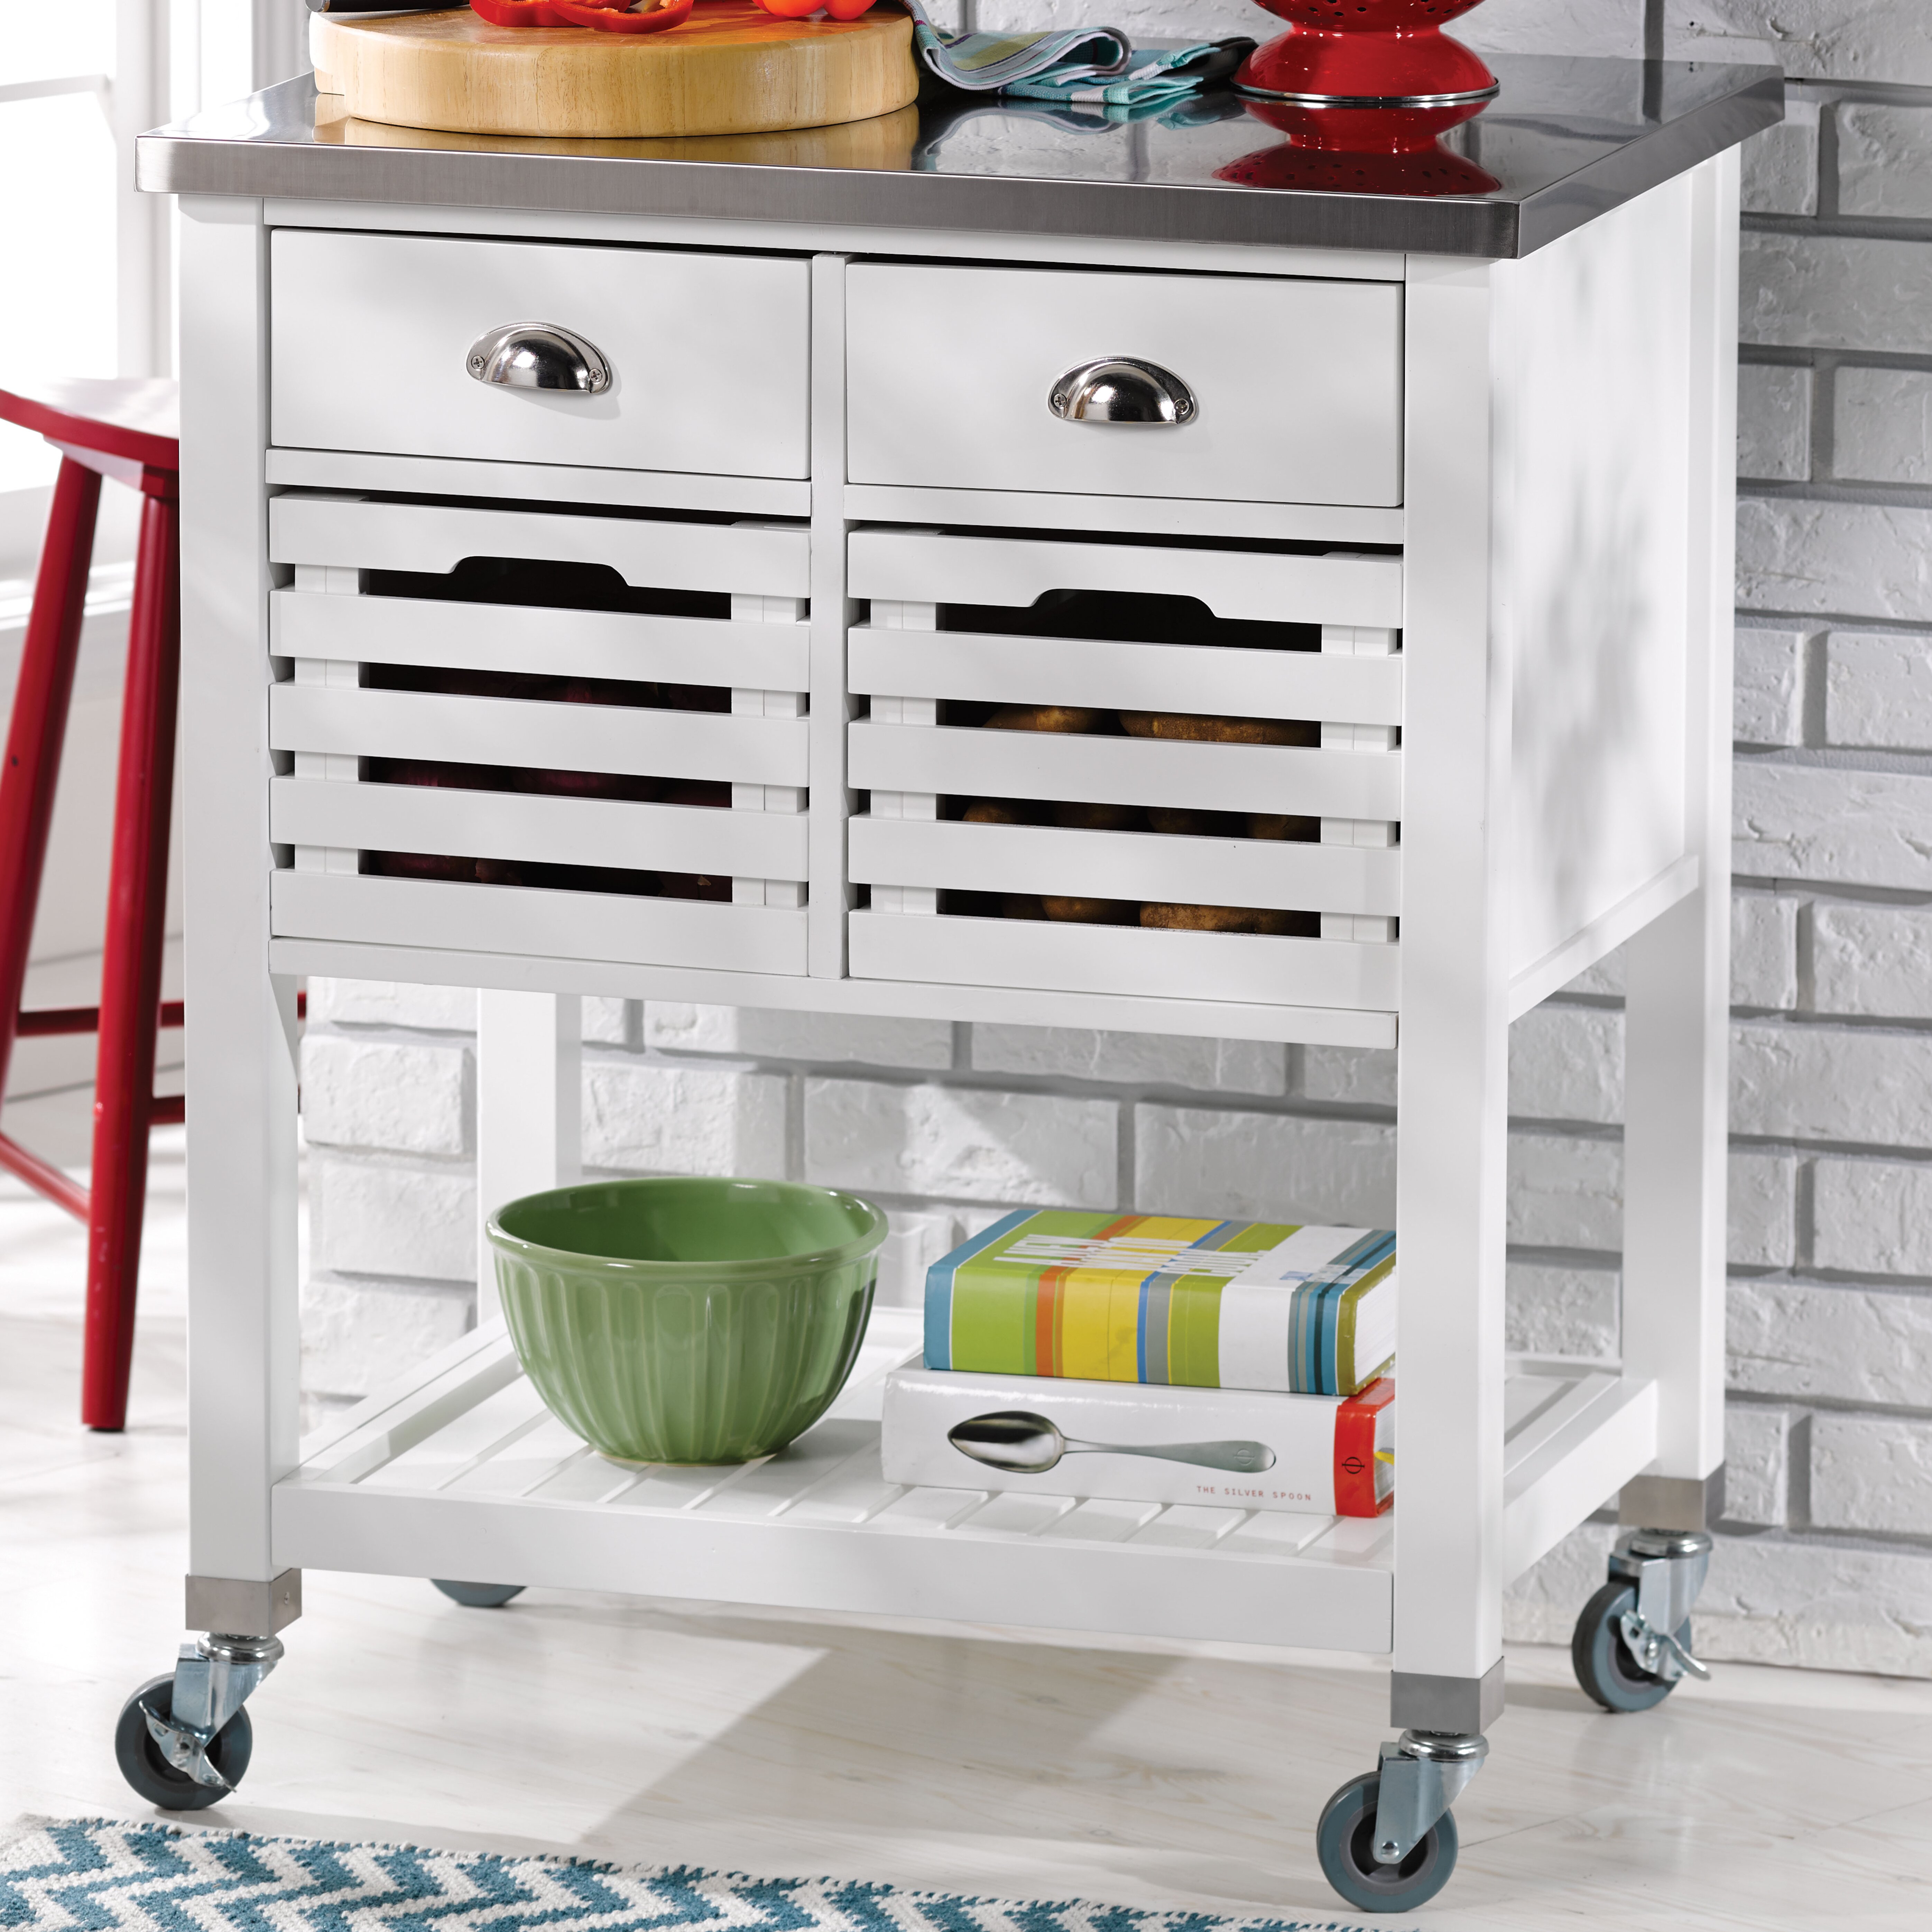 Andover Mills Kitchen Cart with Stainless Steel Top & Reviews | Wayfair Kitchen Cart Stainless Steel Top